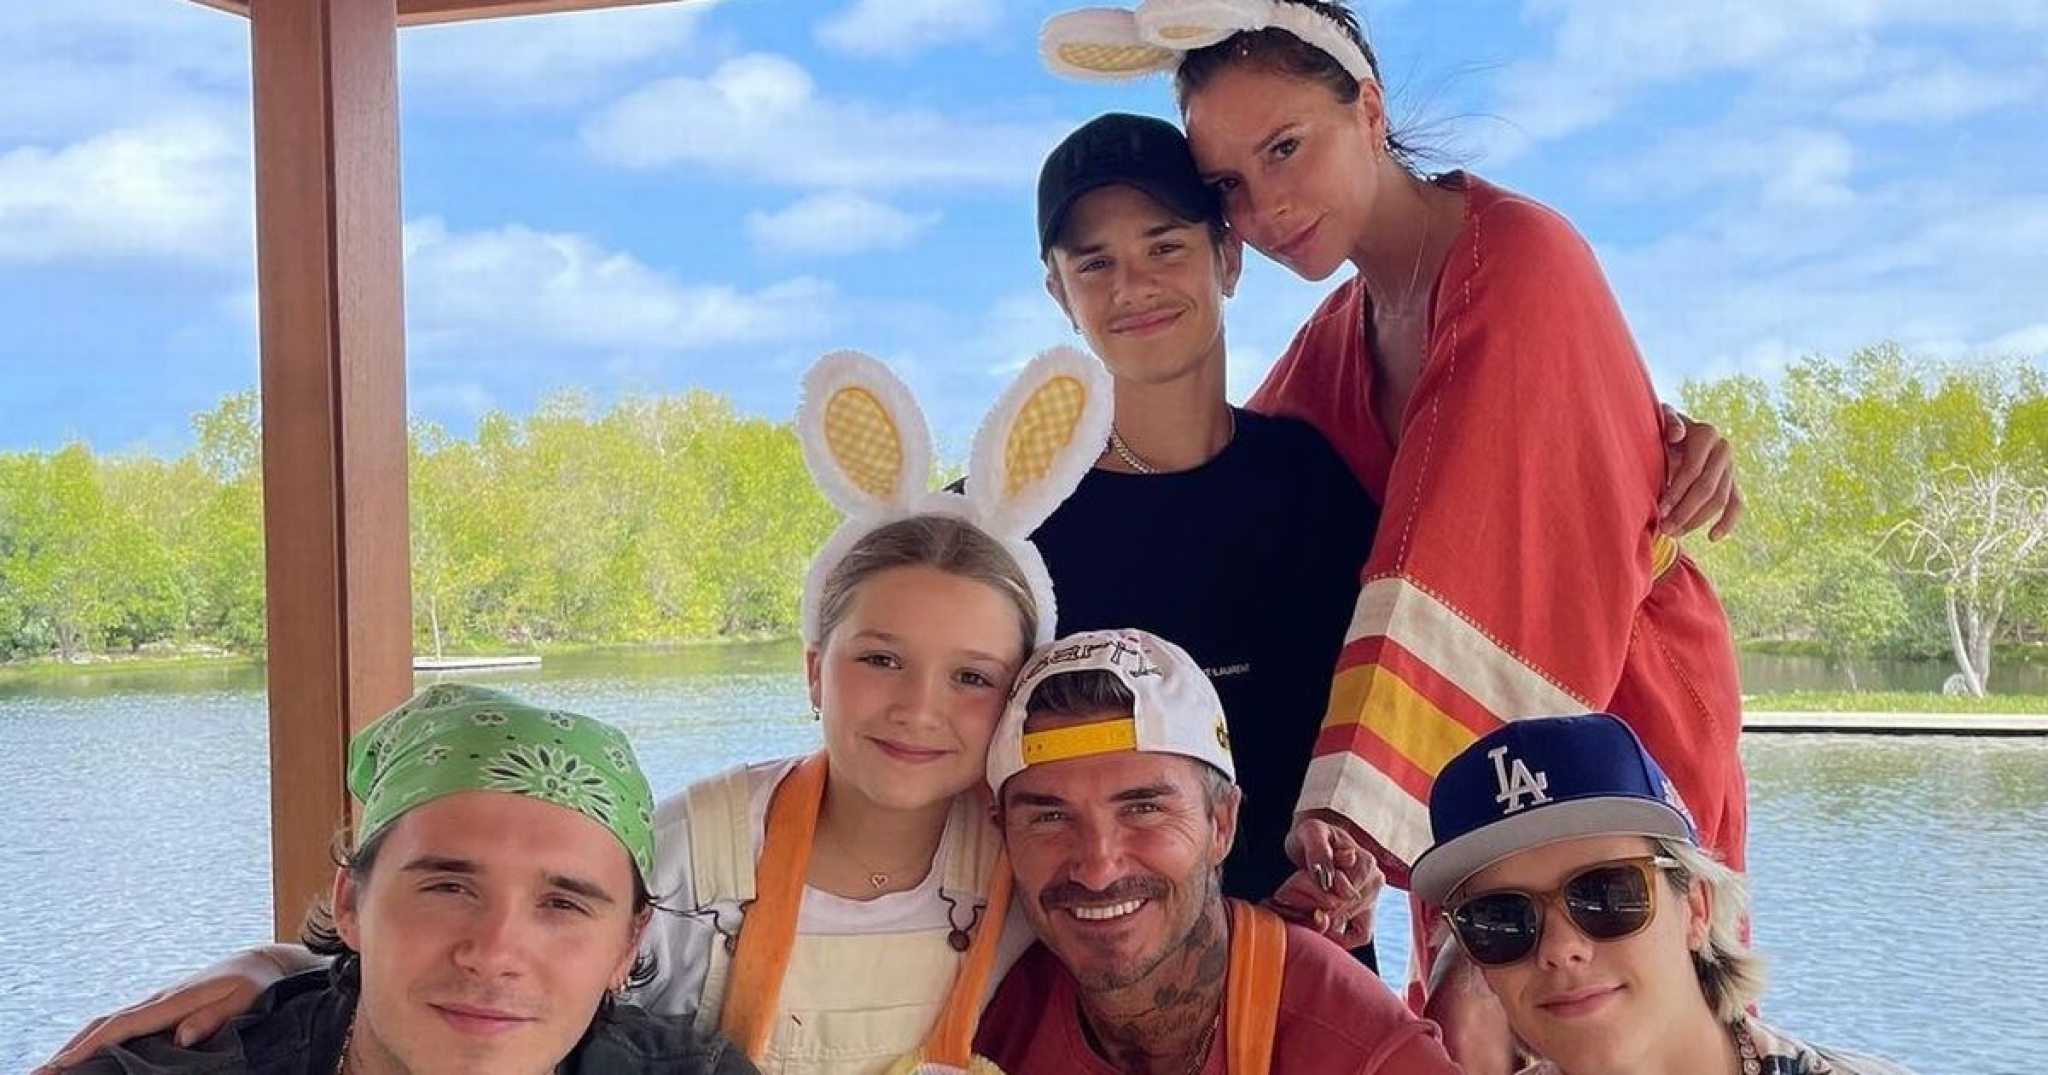 Beckham’s put on giddy display with matching Easter outfits after £500 surprise